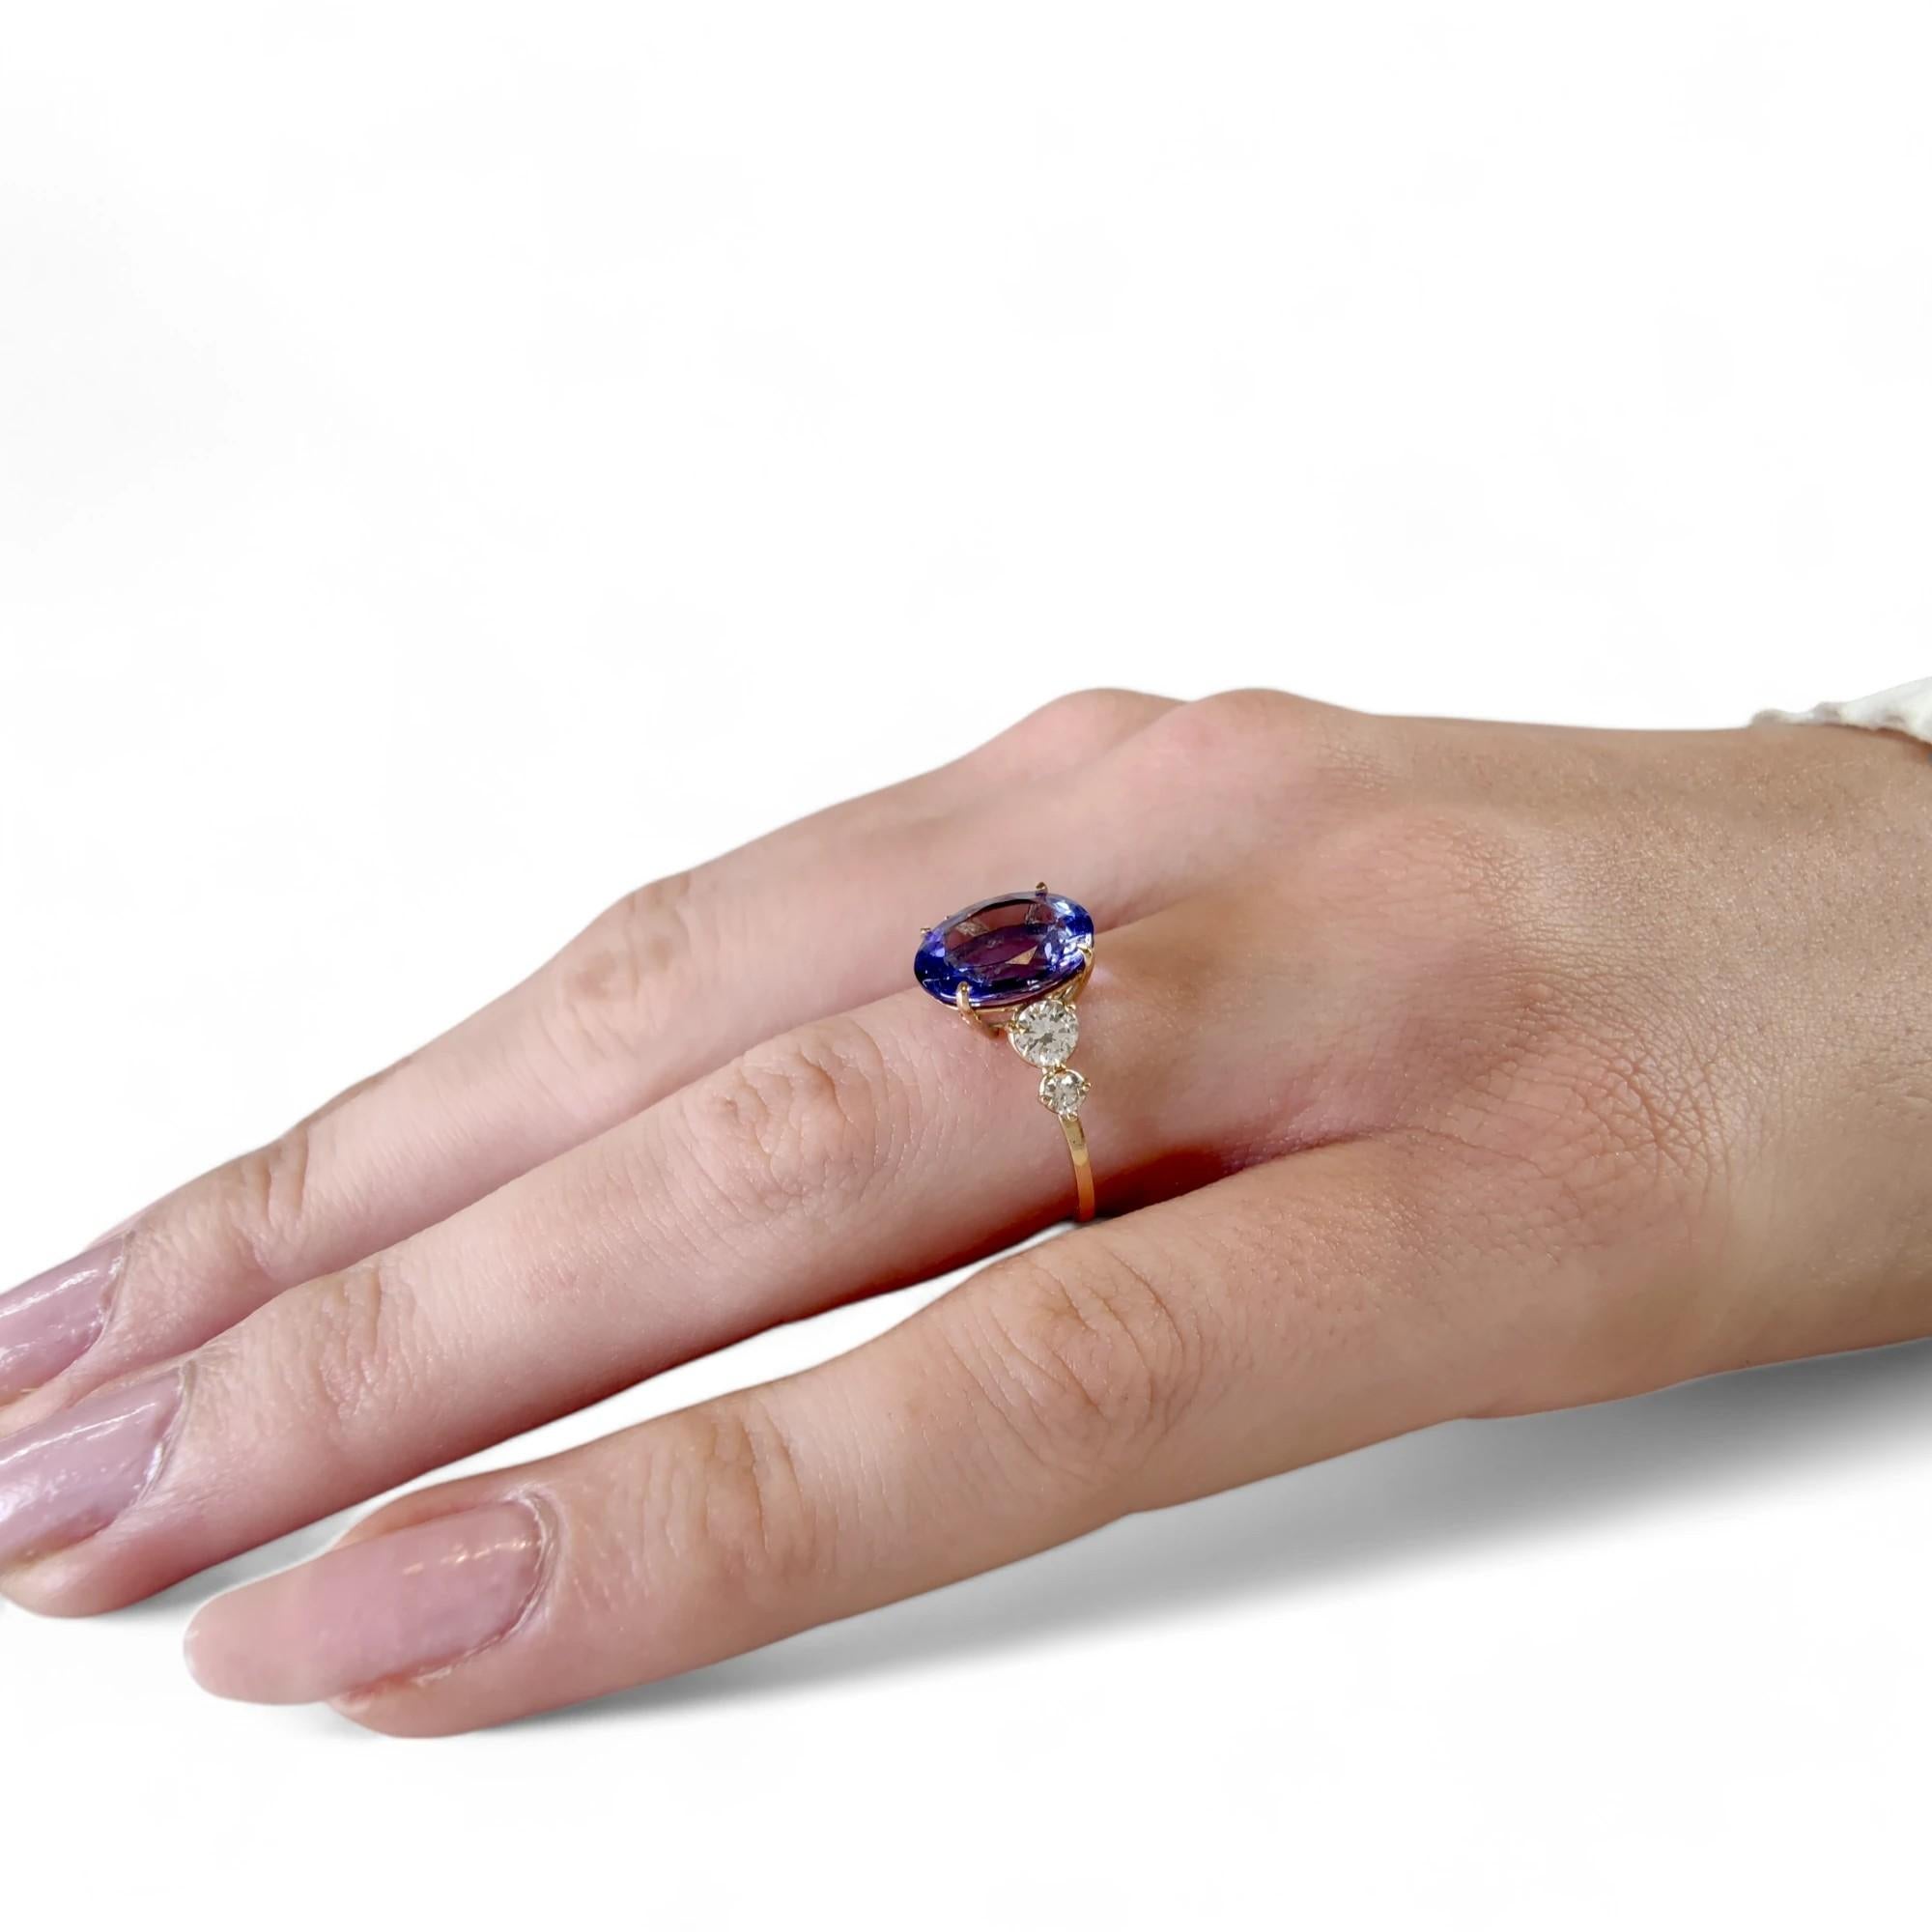 14K Gold Ring with Oval Tanzanite and Diamonds

Experience the exquisite allure of our 14K gold ring, masterfully crafted with a central oval Tanzanite encircled by sparkling diamonds. This contemporary piece is a testament to skilled artisan